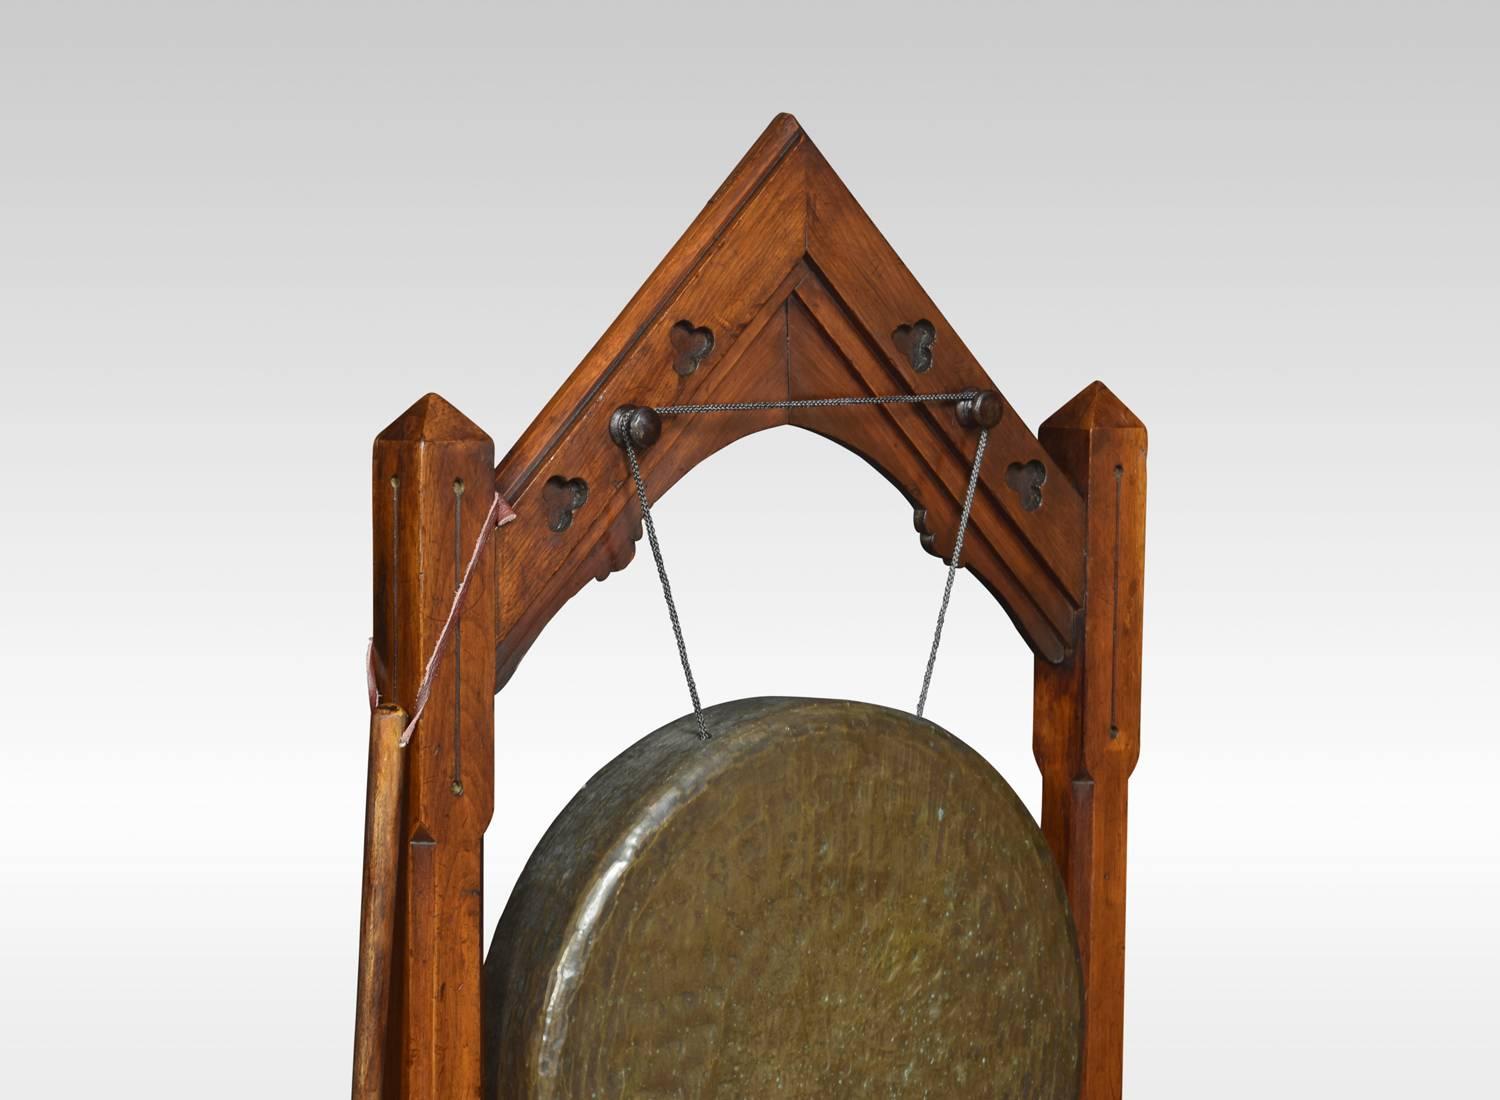 Victorian Gothic Revival oak framed dinner gong, the architectural top above carved supports having canted corner, with suspended brass gong to centre raised up on block feet.
Dimensions:
Height 46 inches
Width 21 inches
Dept 13.5